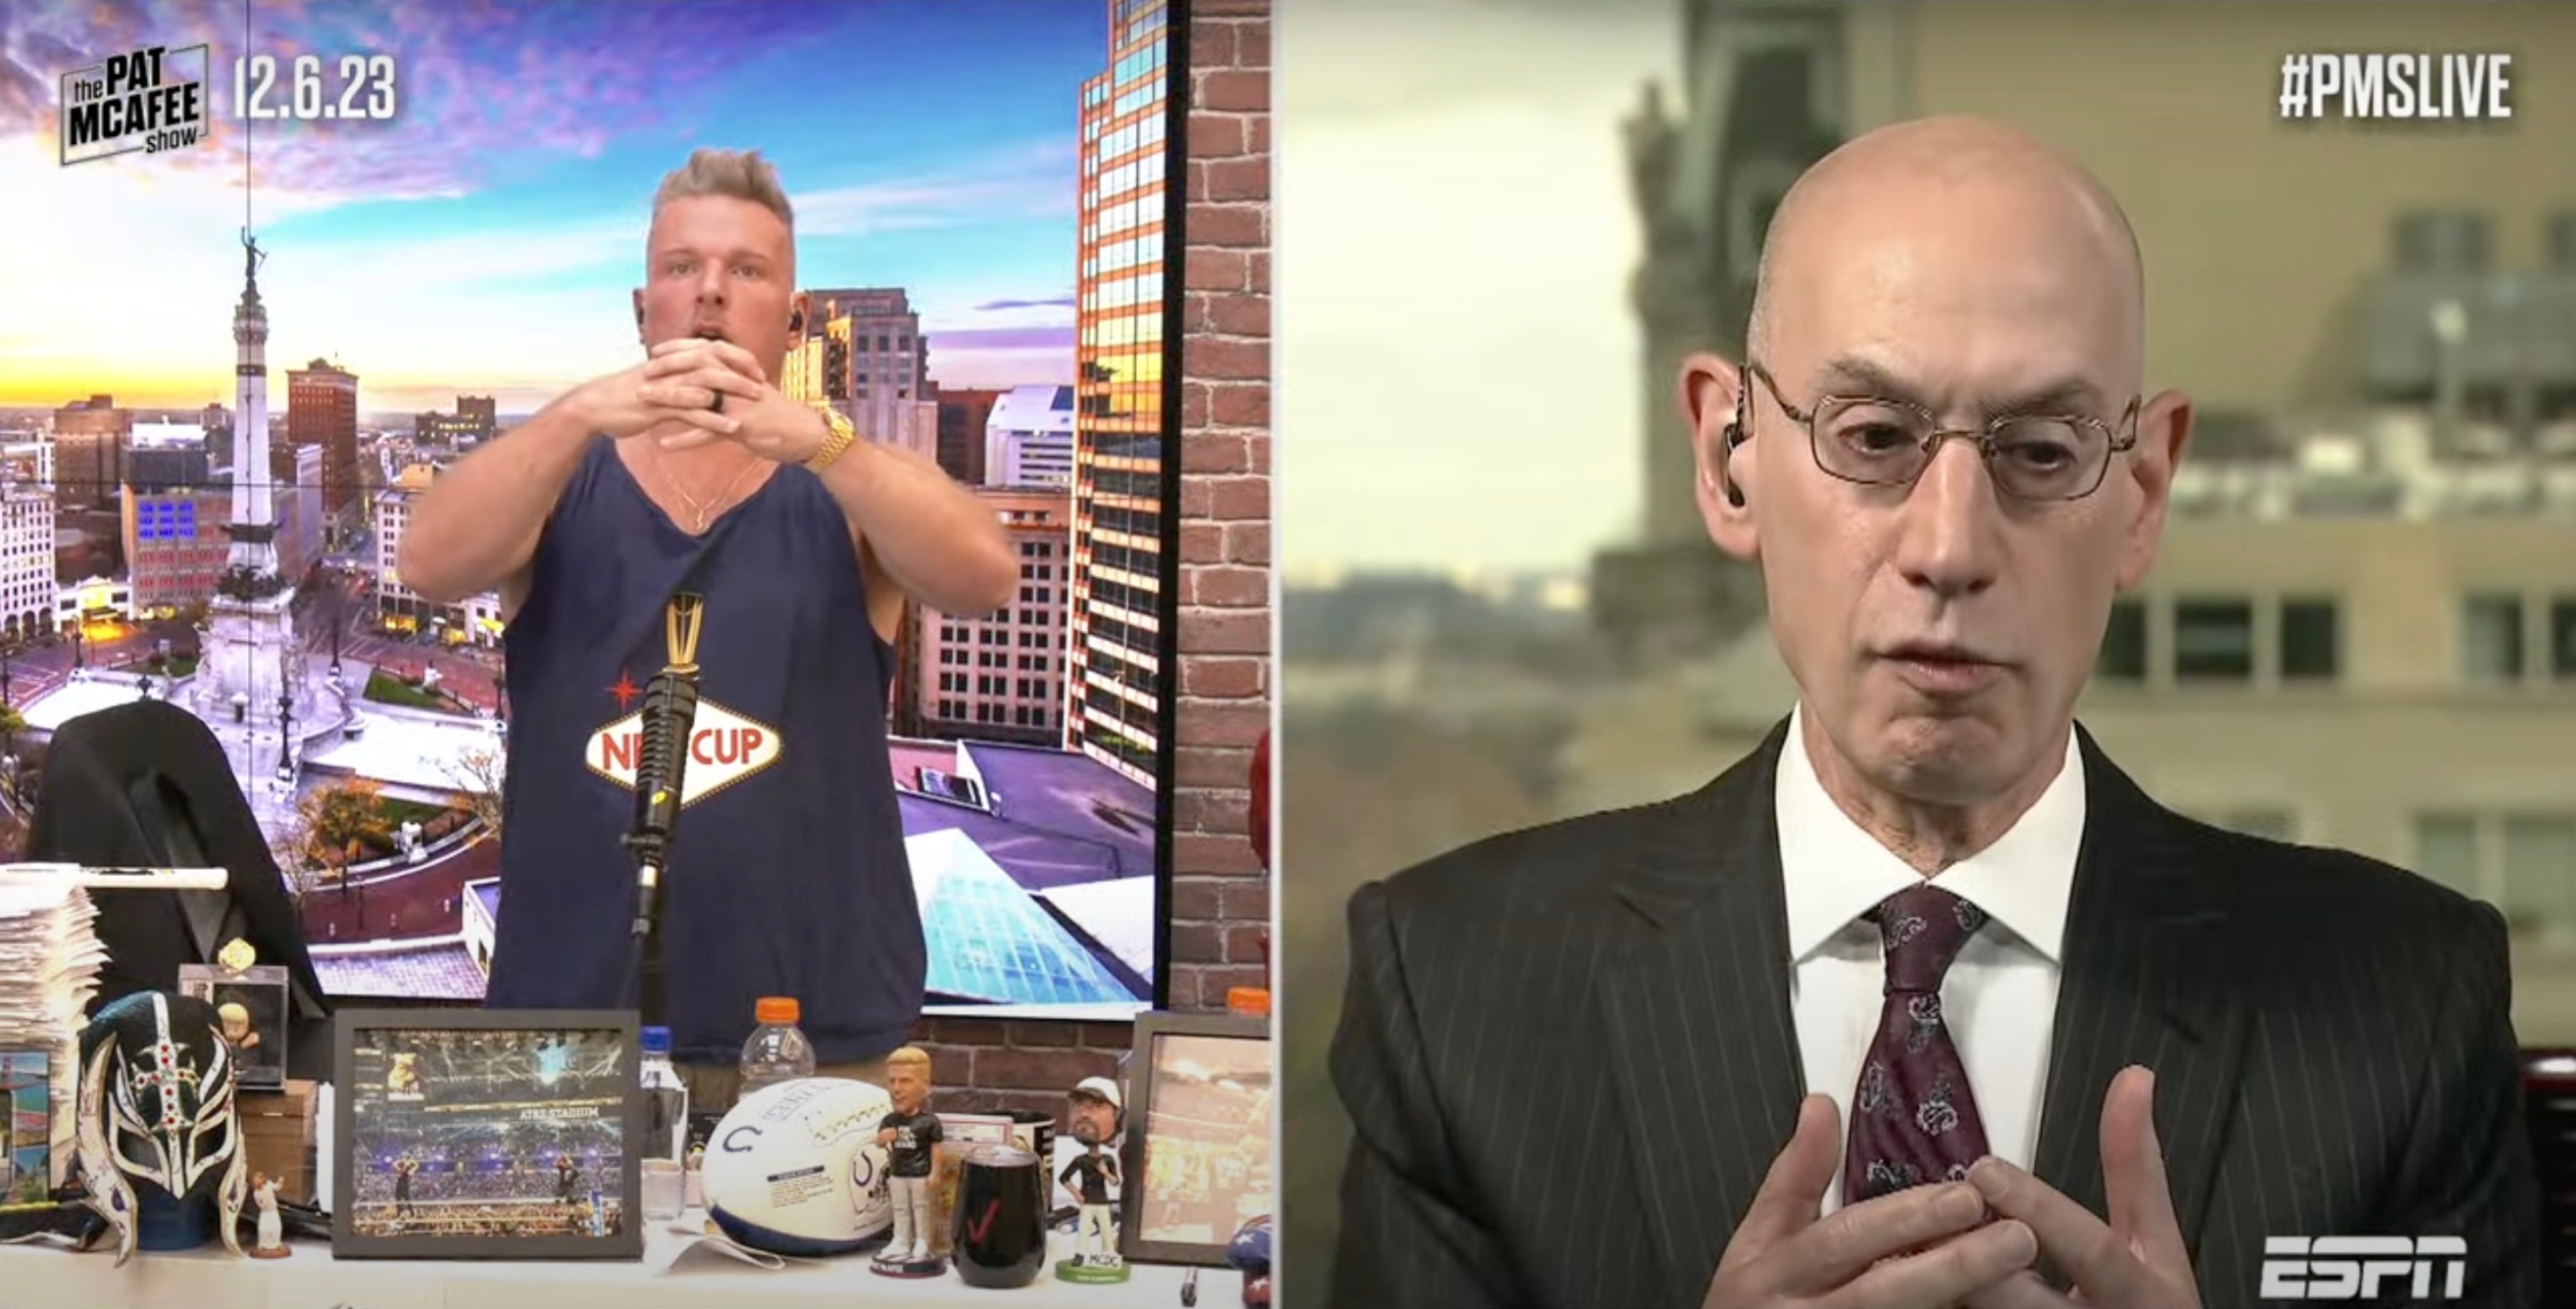 Pat McAfee conducts an interview with Adam Silver